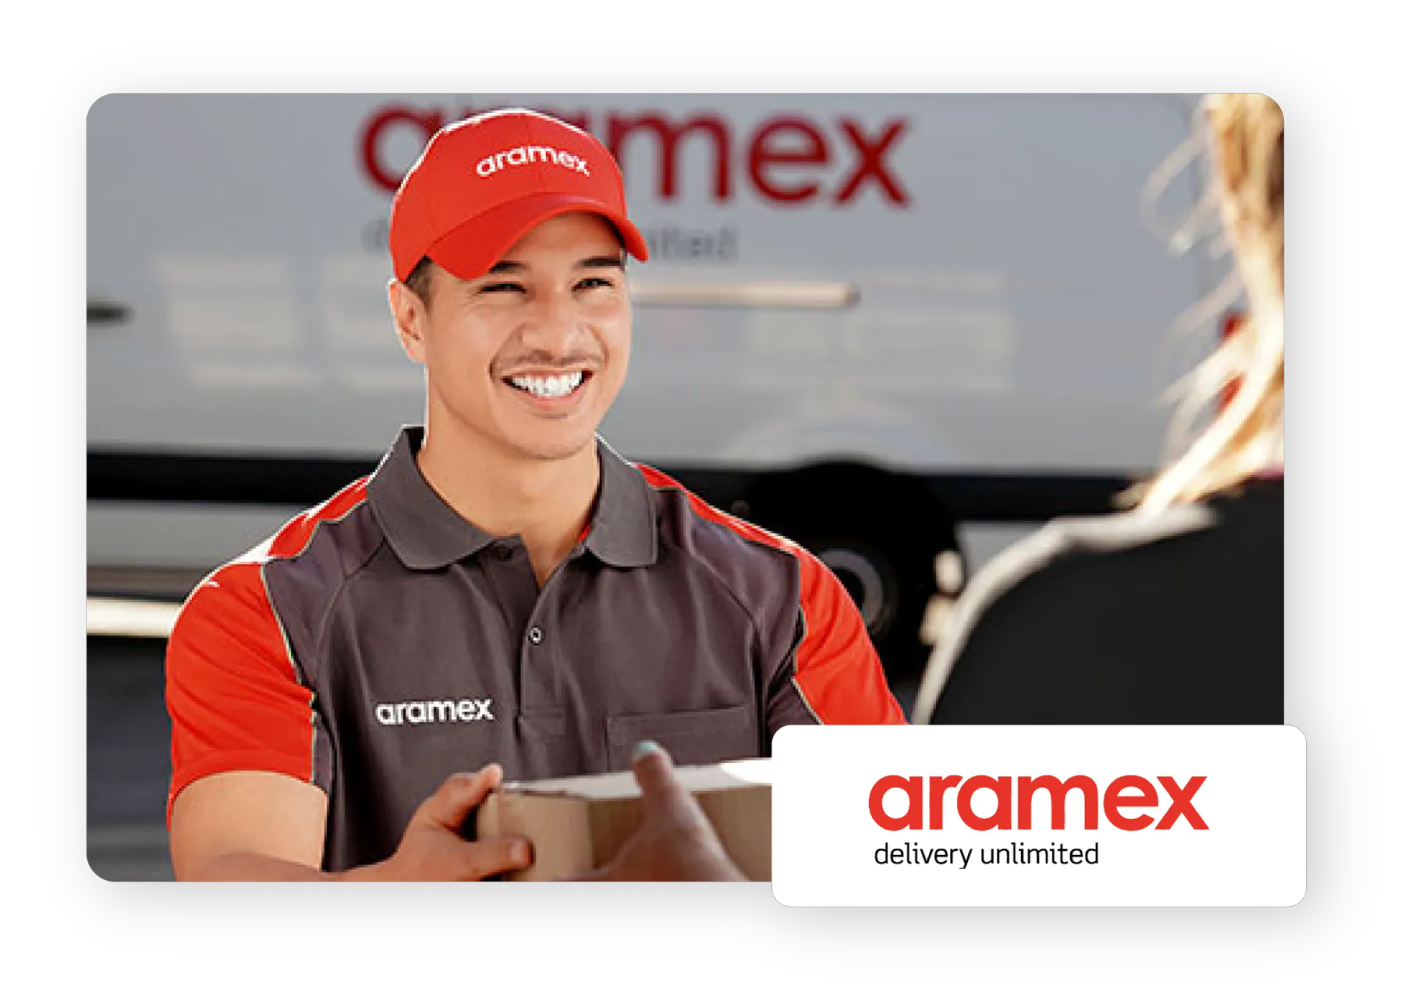 Get estimated Aramex delivery times